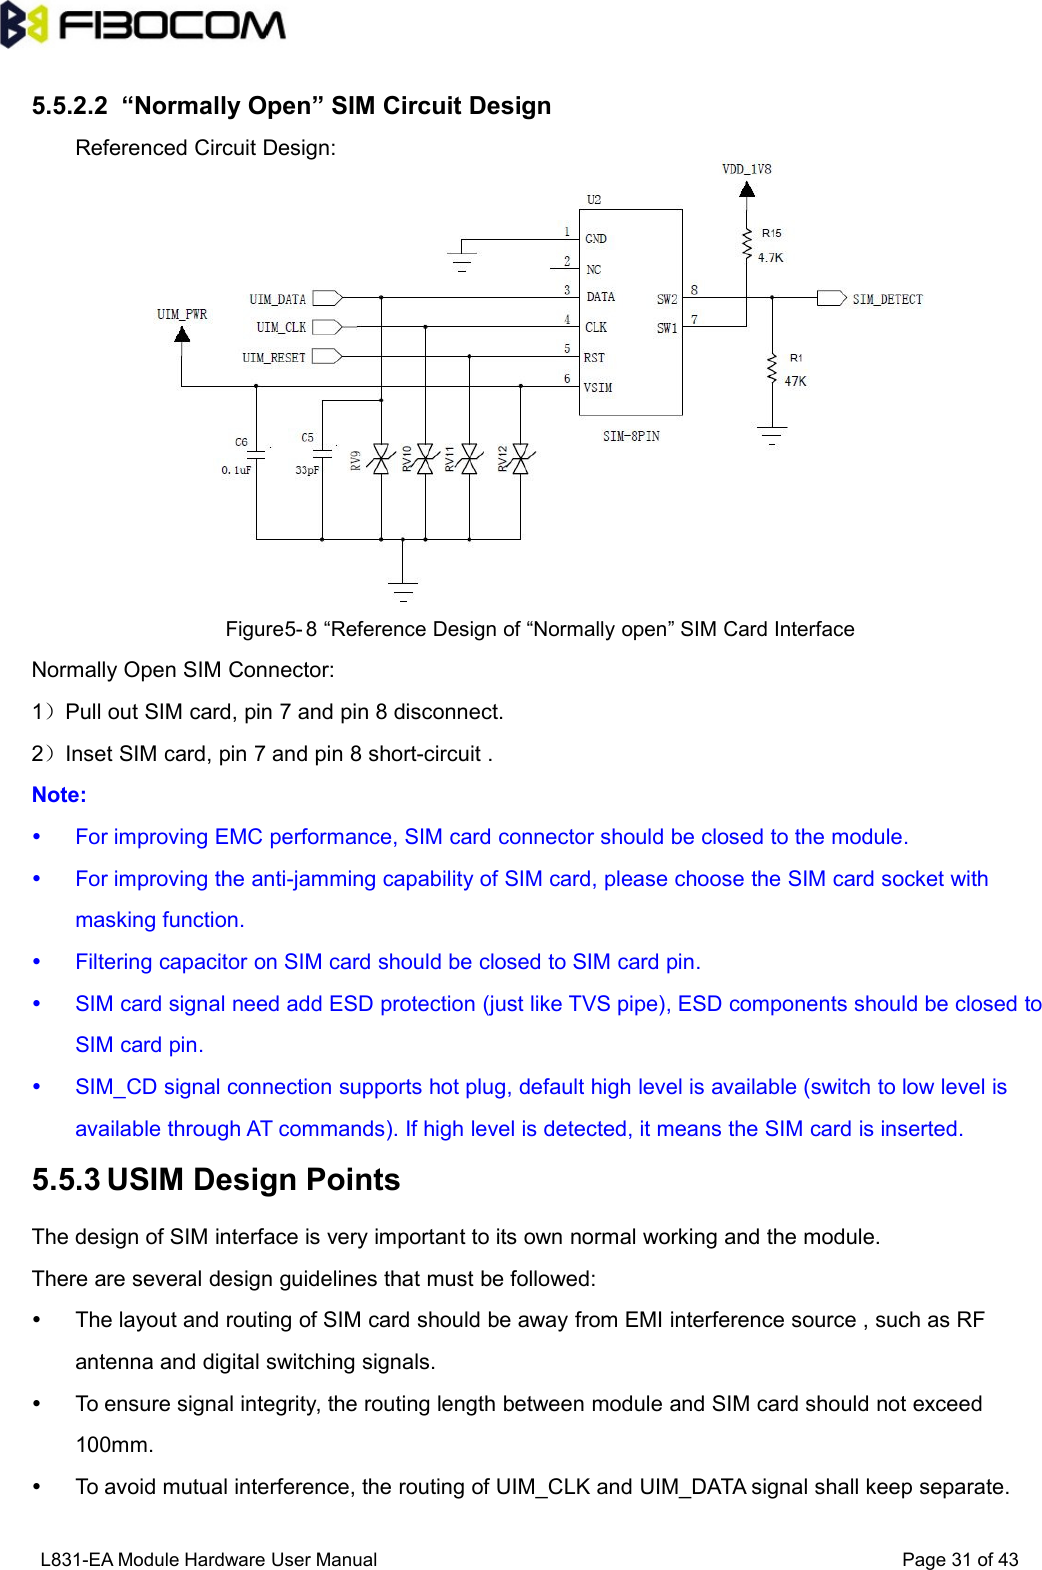 L831-EA Module Hardware User Manual Page31of435.5.2.2 “Normally Open” SIM Circuit DesignReferenced Circuit Design:Figure5- 8 “Reference Design of “Normally open” SIM Card InterfaceNormally Open SIM Connector:1）Pull out SIM card, pin 7 and pin 8 disconnect.2）Inset SIM card, pin 7 and pin 8 short-circuit .Note:For improving EMC performance, SIM card connector should be closed to the module.For improving the anti-jamming capability of SIM card, please choose the SIM card socket withmasking function.Filtering capacitor on SIM card should be closed to SIM card pin.SIM card signal need add ESD protection (just like TVS pipe), ESD components should be closed toSIM card pin.SIM_CD signal connection supports hot plug, default high level is available (switch to low level isavailable through AT commands). If high level is detected, it means the SIM card is inserted.5.5.3 USIM Design PointsThe design of SIM interface is very important to its own normal working and the module.There are several design guidelines that must be followed:The layout and routing of SIM card should be away from EMI interference source , such as RFantenna and digital switching signals.To ensure signal integrity, the routing length between module and SIM card should not exceed100mm.To avoid mutual interference, the routing of UIM_CLK and UIM_DATA signal shall keep separate.